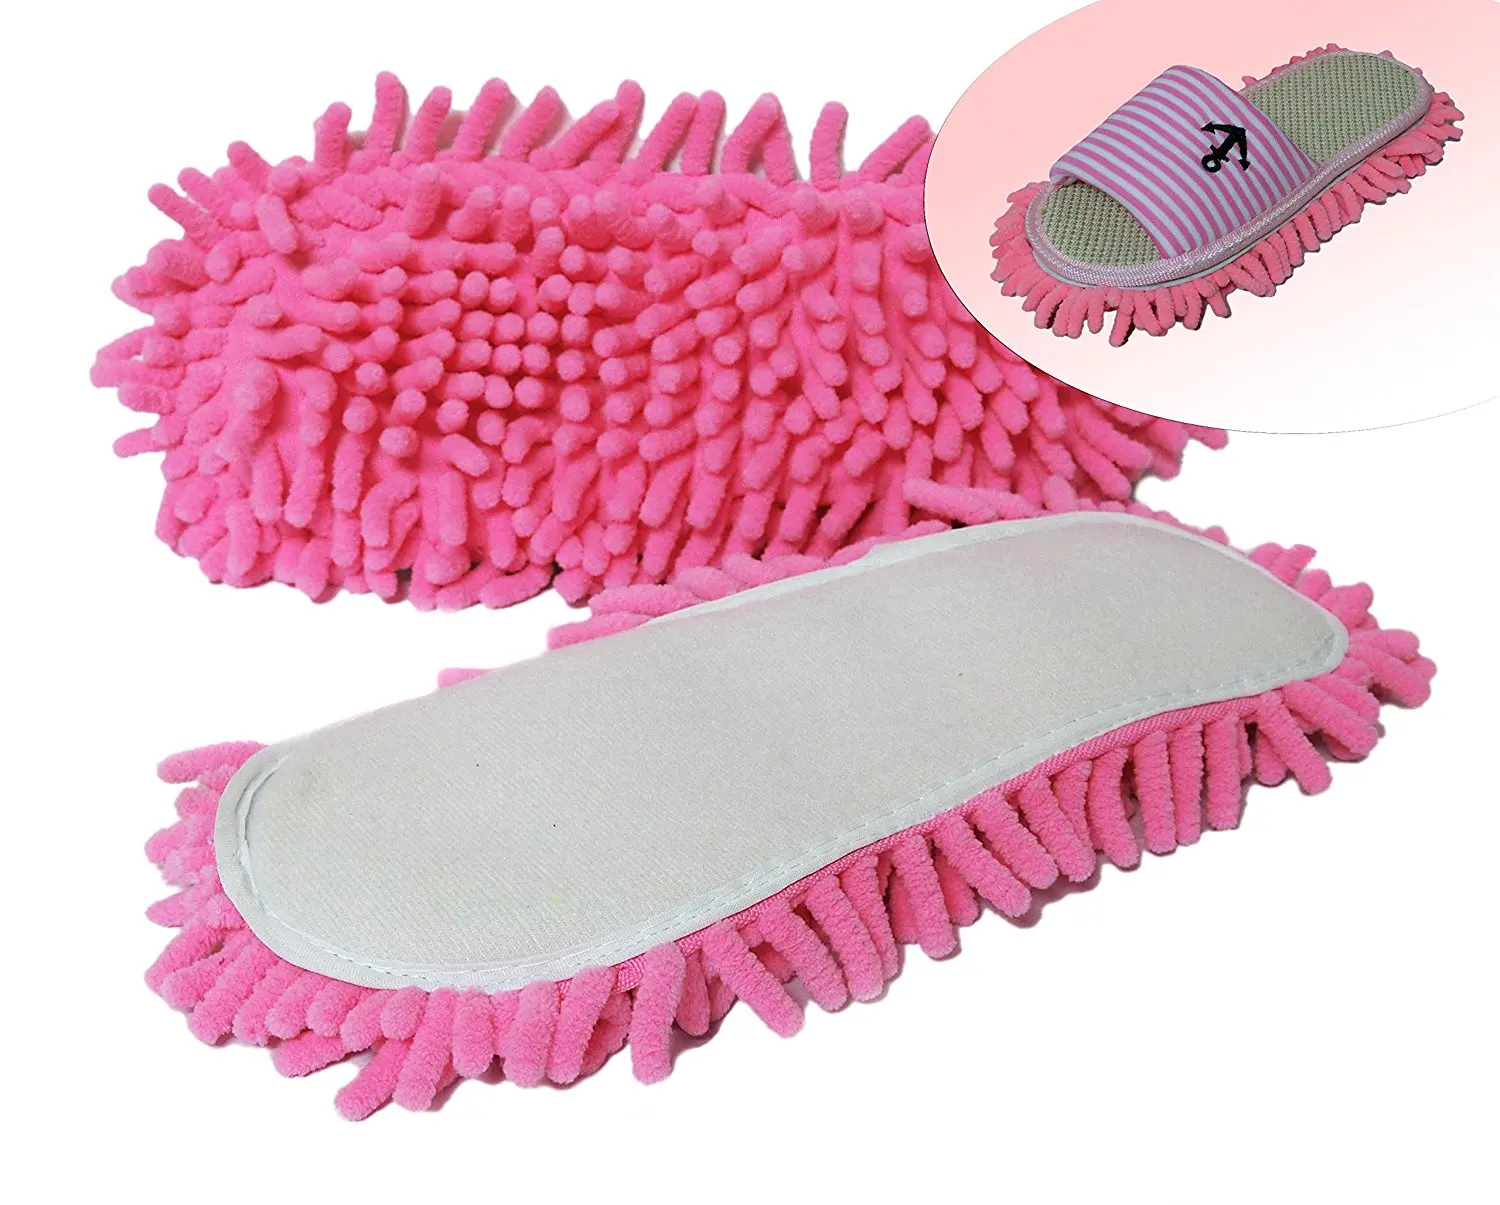 slippers with mops on the bottom